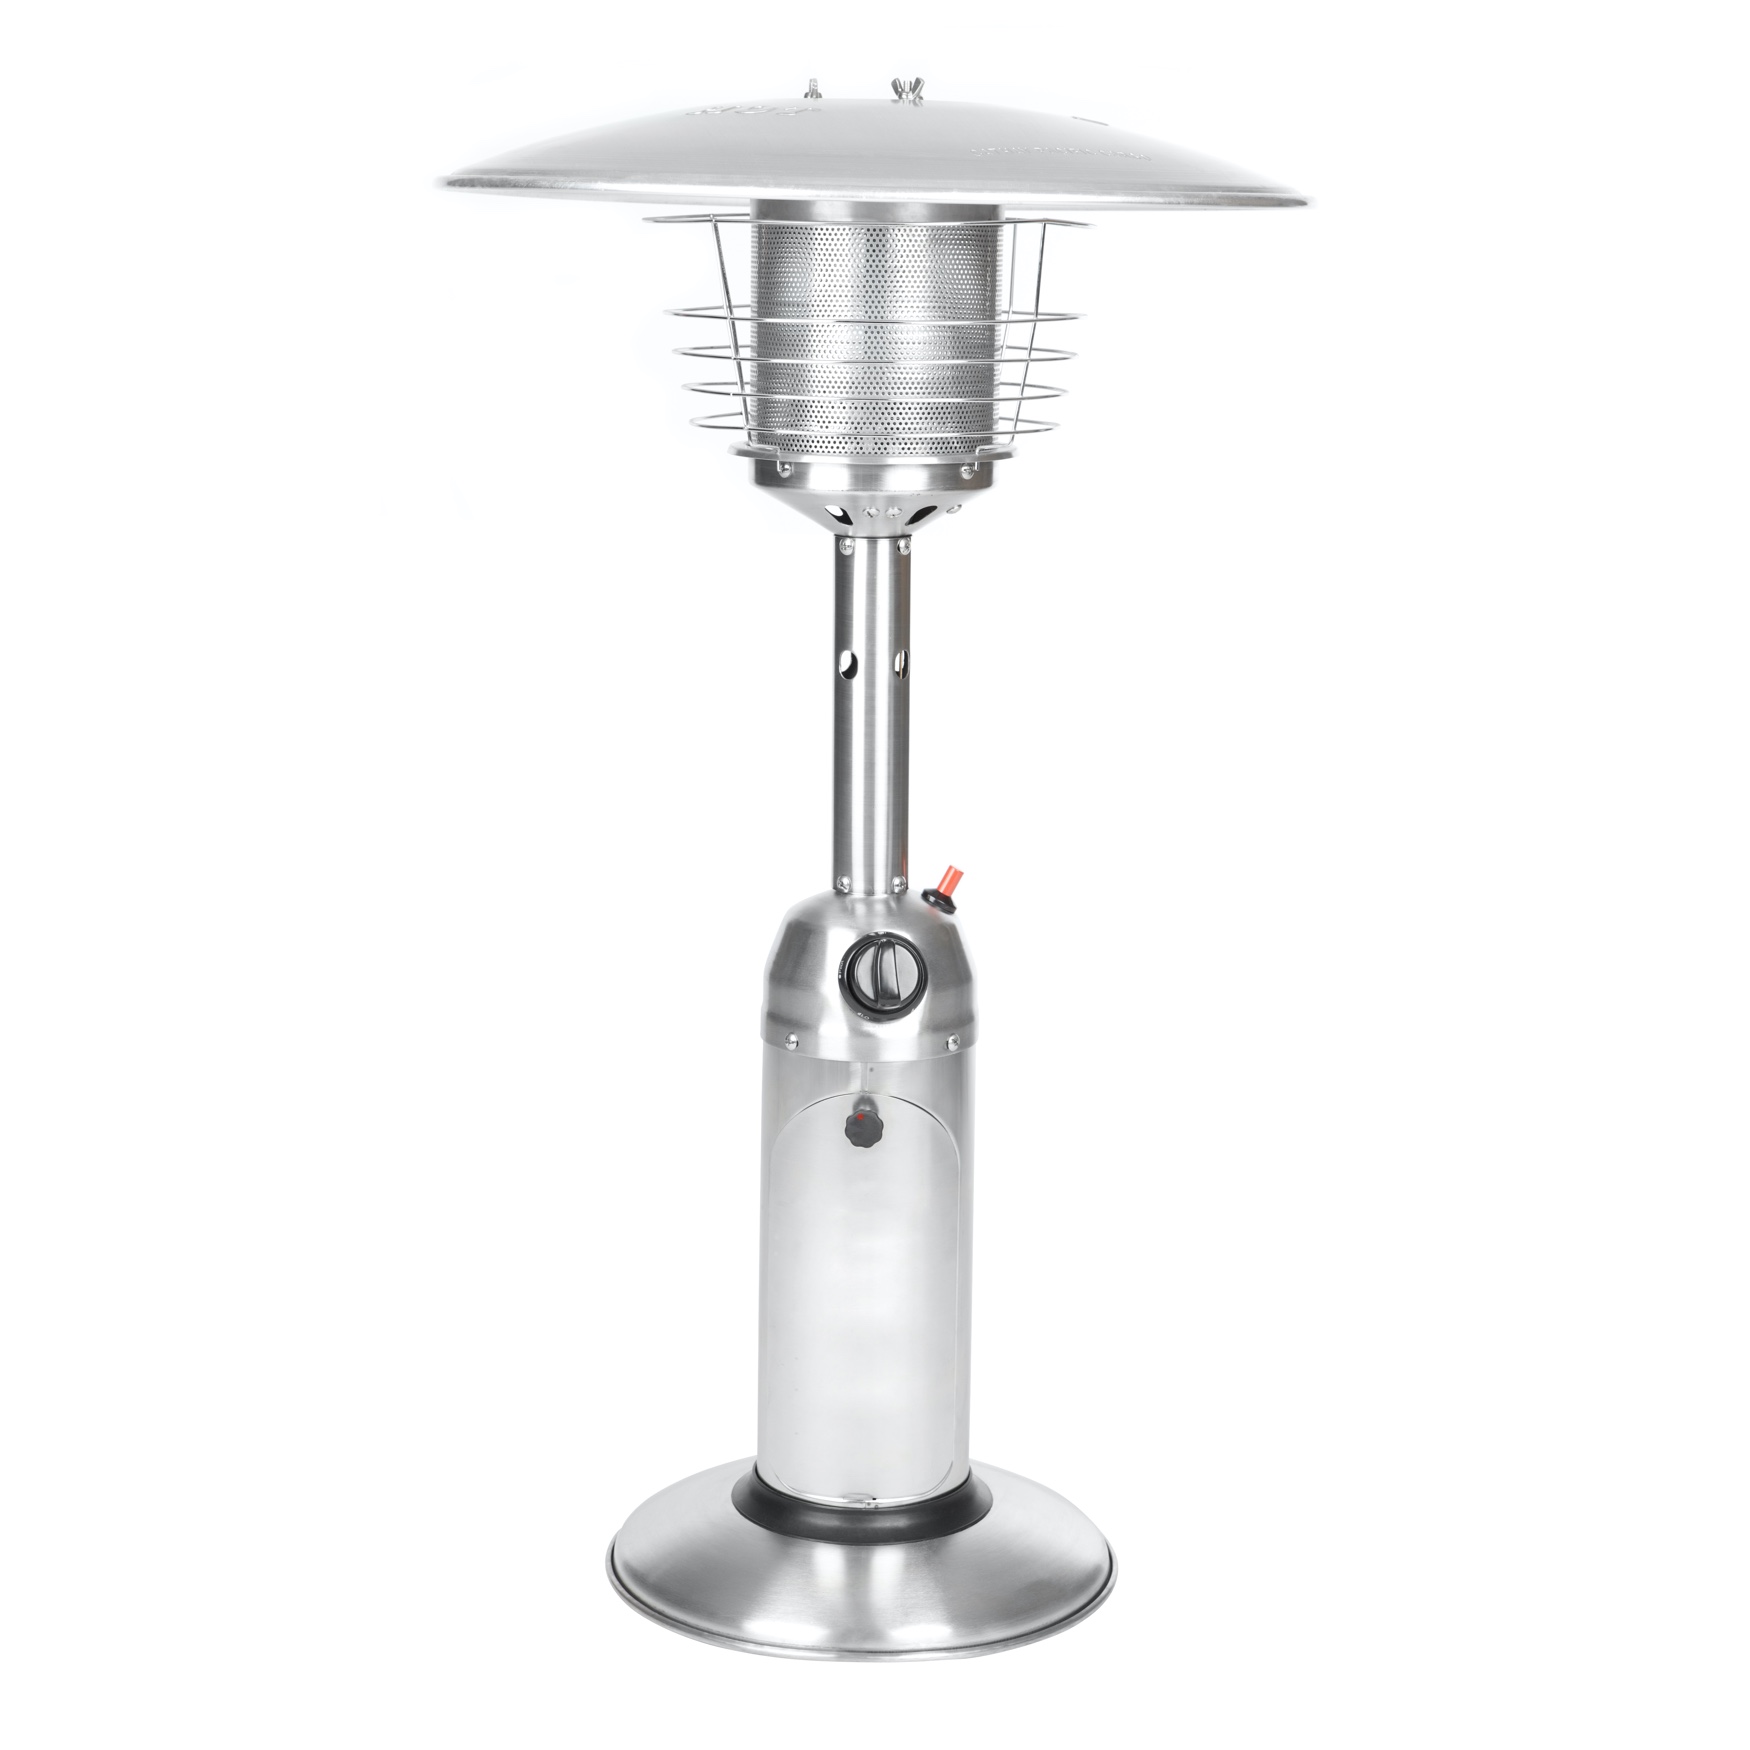 Stainless Steel Table Top Patio Heater, STAINLESS STEEL